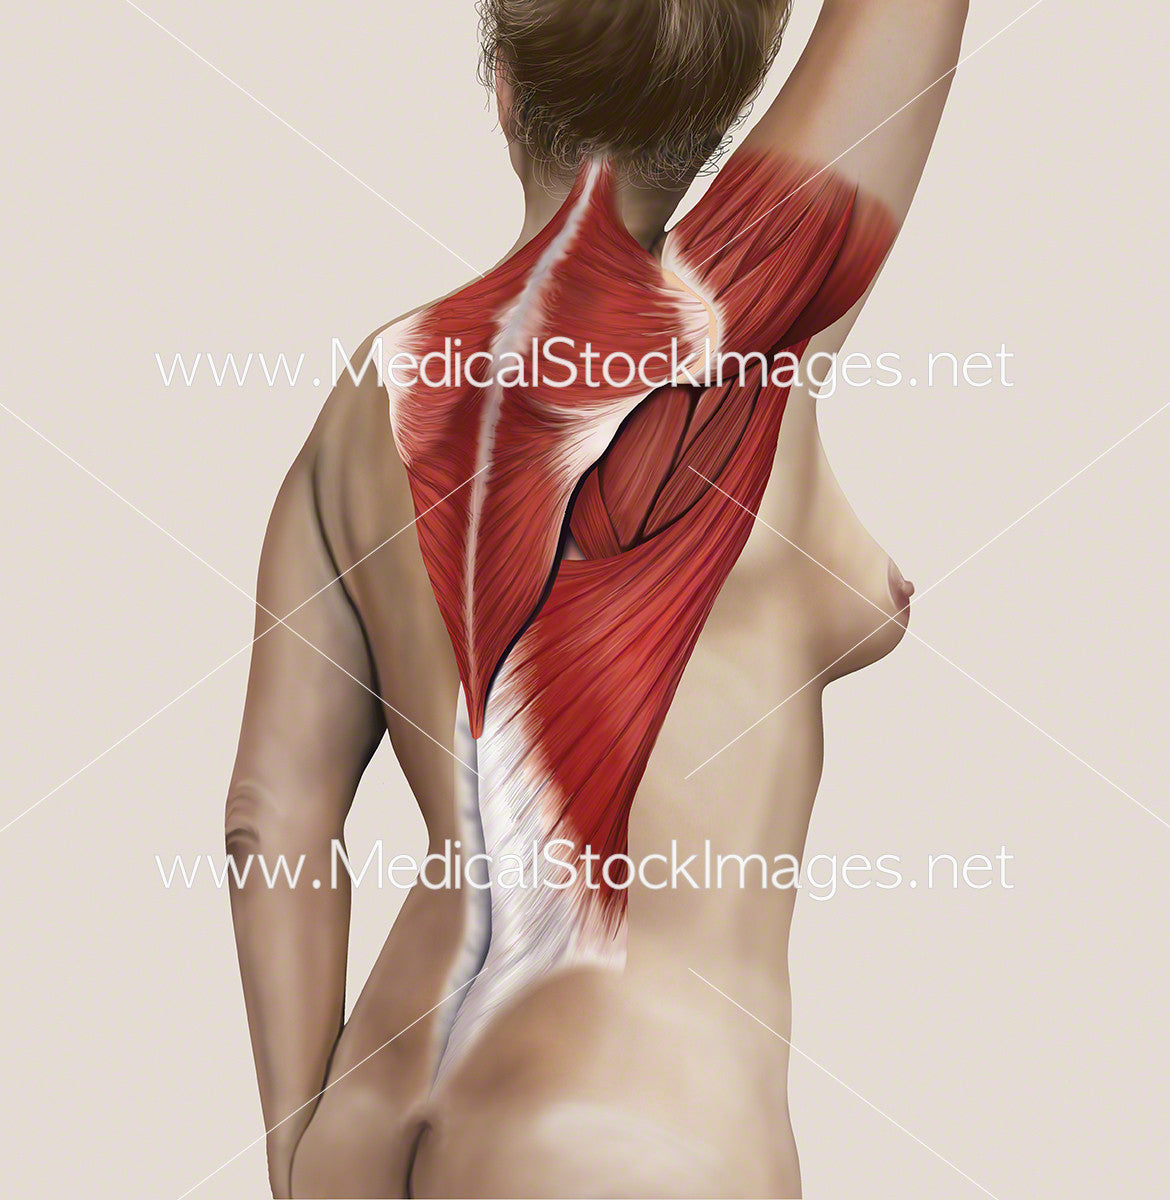 Back Region with Muscles – Medical Stock Images Company